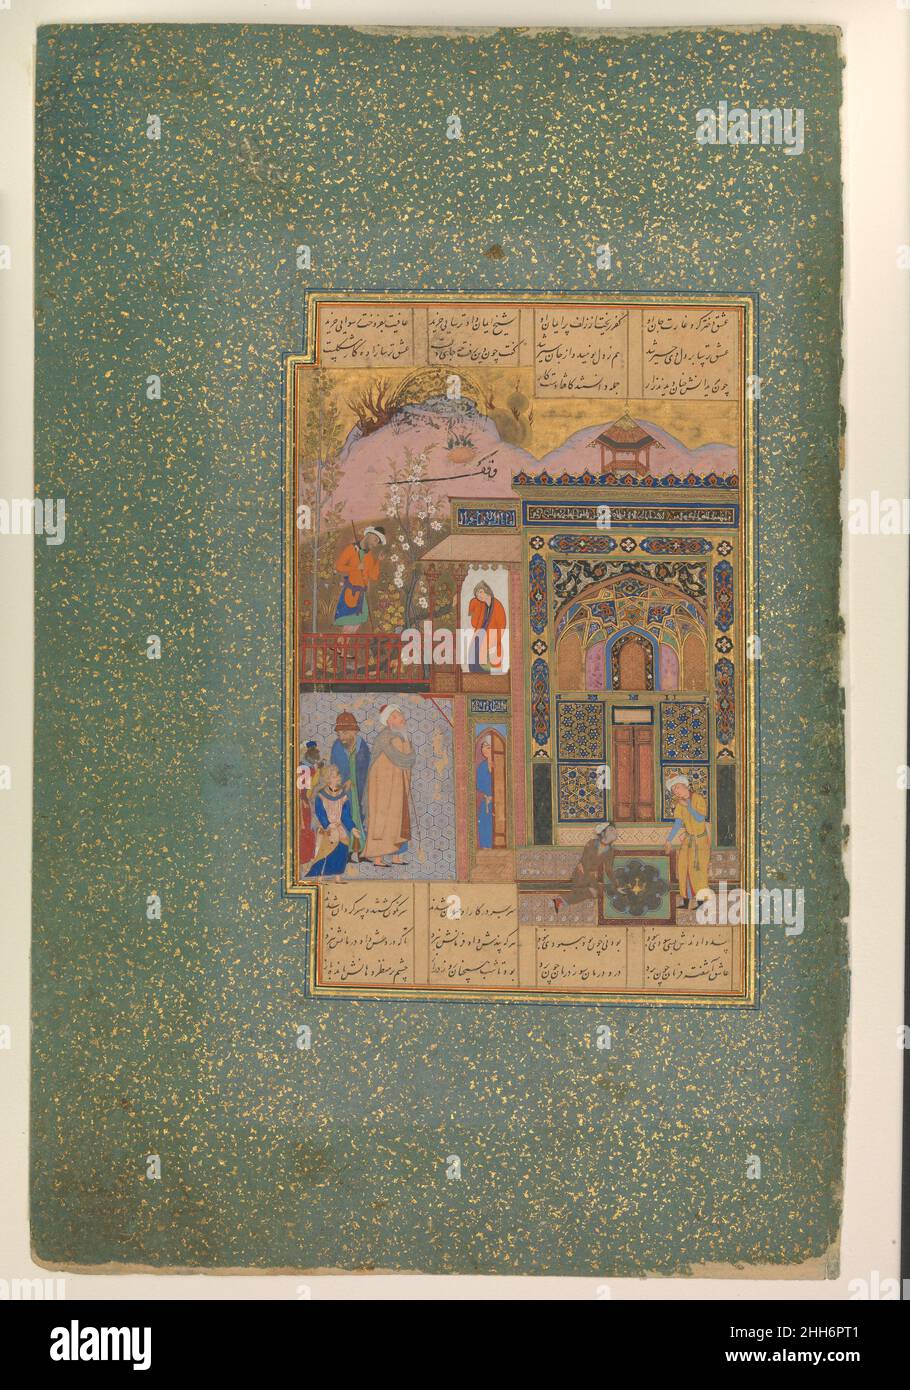 'Shaikh San'an beneath the Window of the Christian Maiden', Folio18r from a Mantiq al-tair (Language of the Birds) ca. 1600 Farid al-Din `Attar This Safavid illustration depicts a scene from a famous story of Shaikh San'an that is often illustrated in other manuscripts of the Mantiq al-Tayr. The story is as follows: A celebrated shaikh named San'an went from Ka'ba to Greece and fell in love with a Christian maiden. At her suggestion, he became a Christian and even looked after swine, which are considered unclean in Islam. When his disciples heard about this, they came to Greece and prayed to G Stock Photo